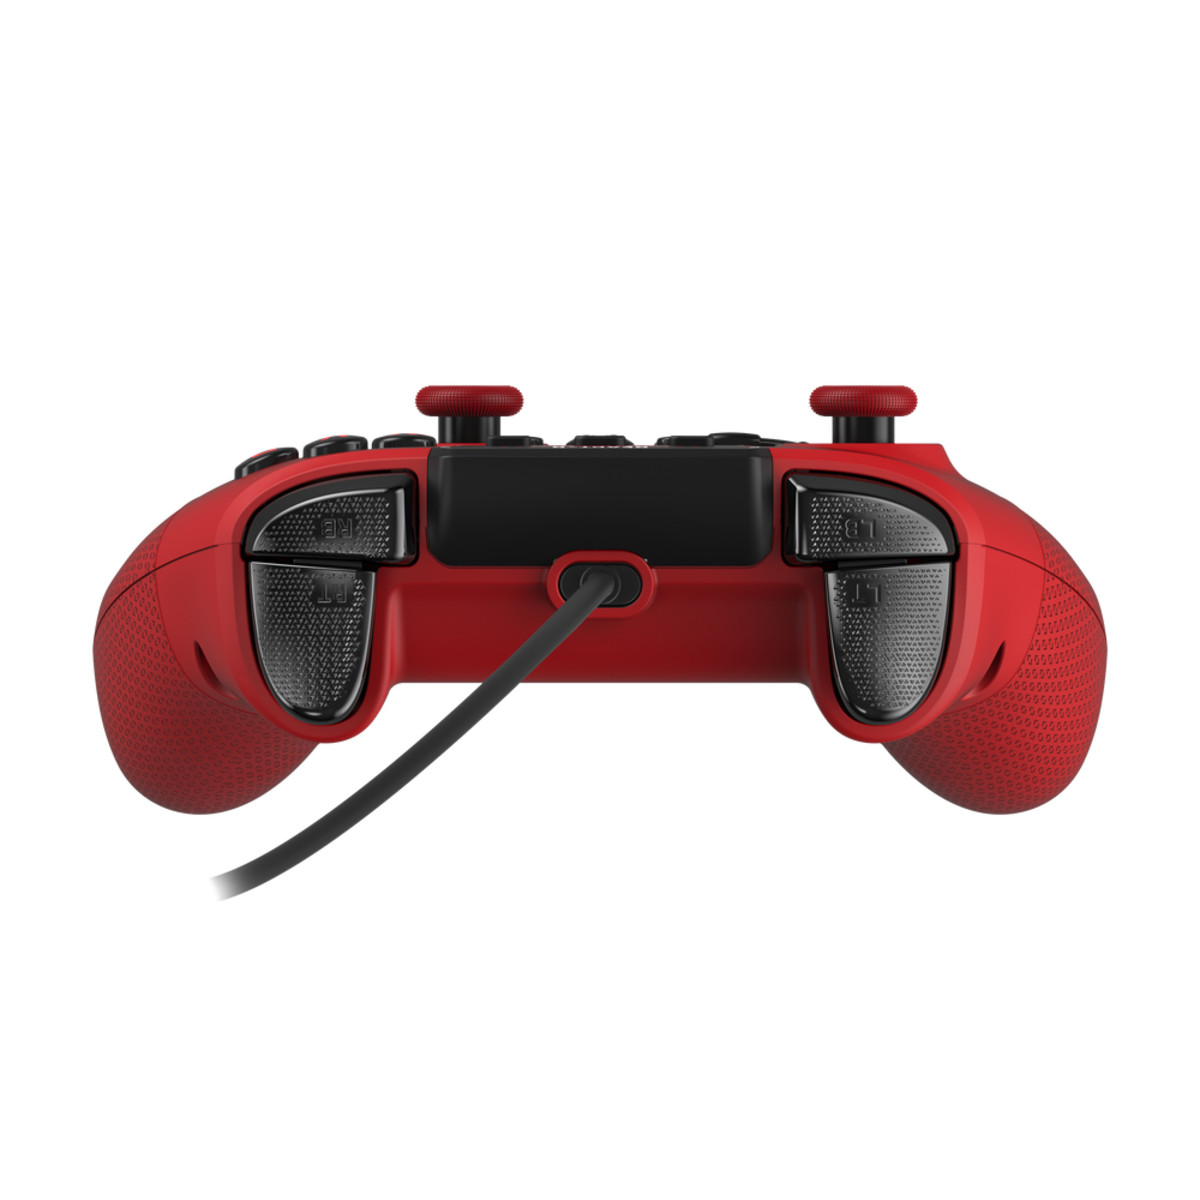 React-R Wired Controller Red